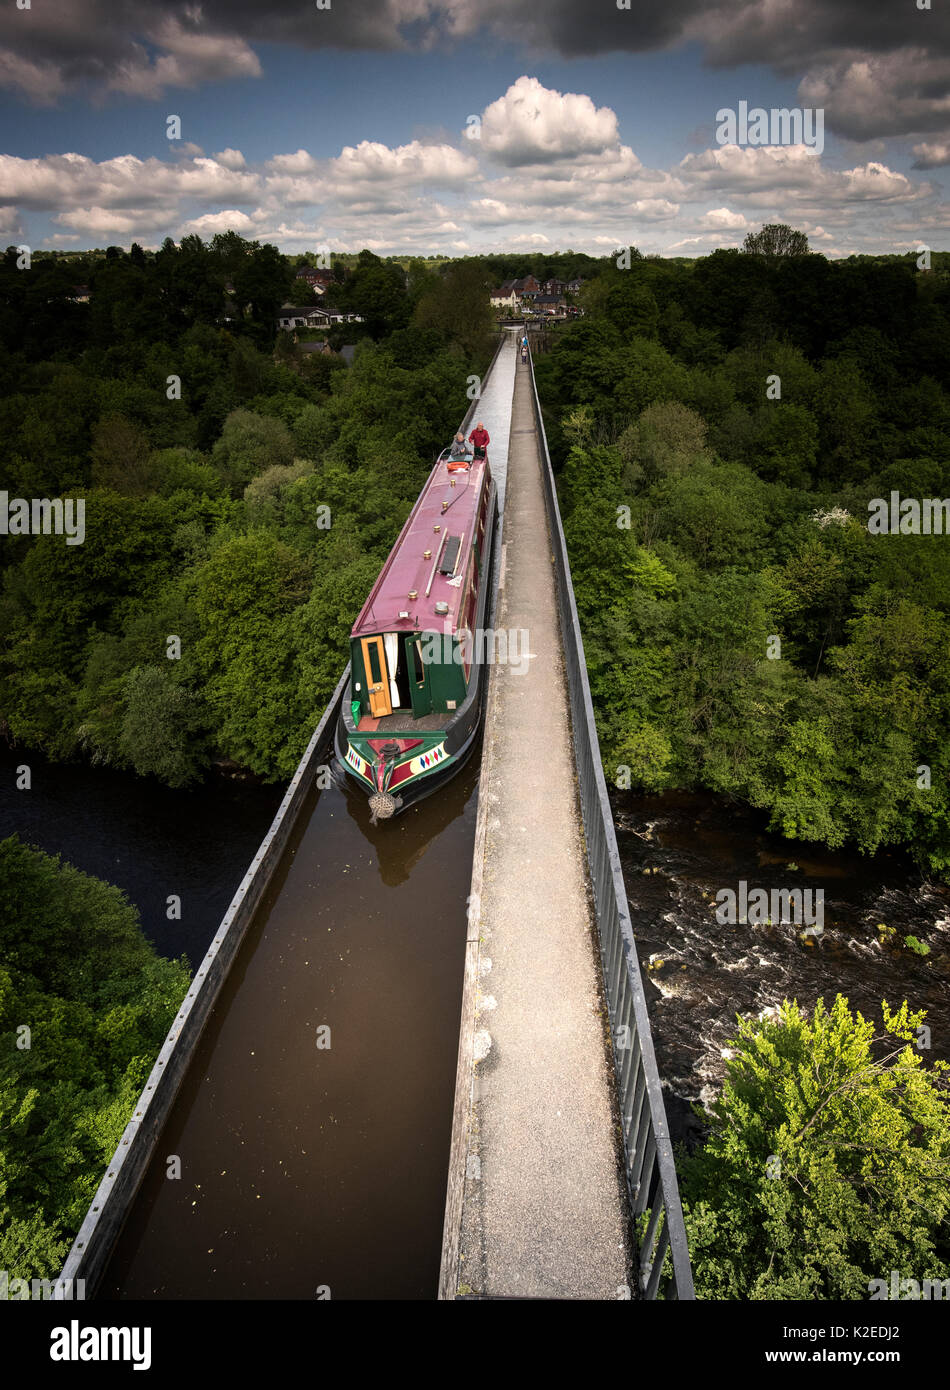 The Pontcysyllte Aqueduct carries the Llangollen Canal over the River Dee and its valley, near Wrexham, Wales, UK, a World heritage site. Stock Photo